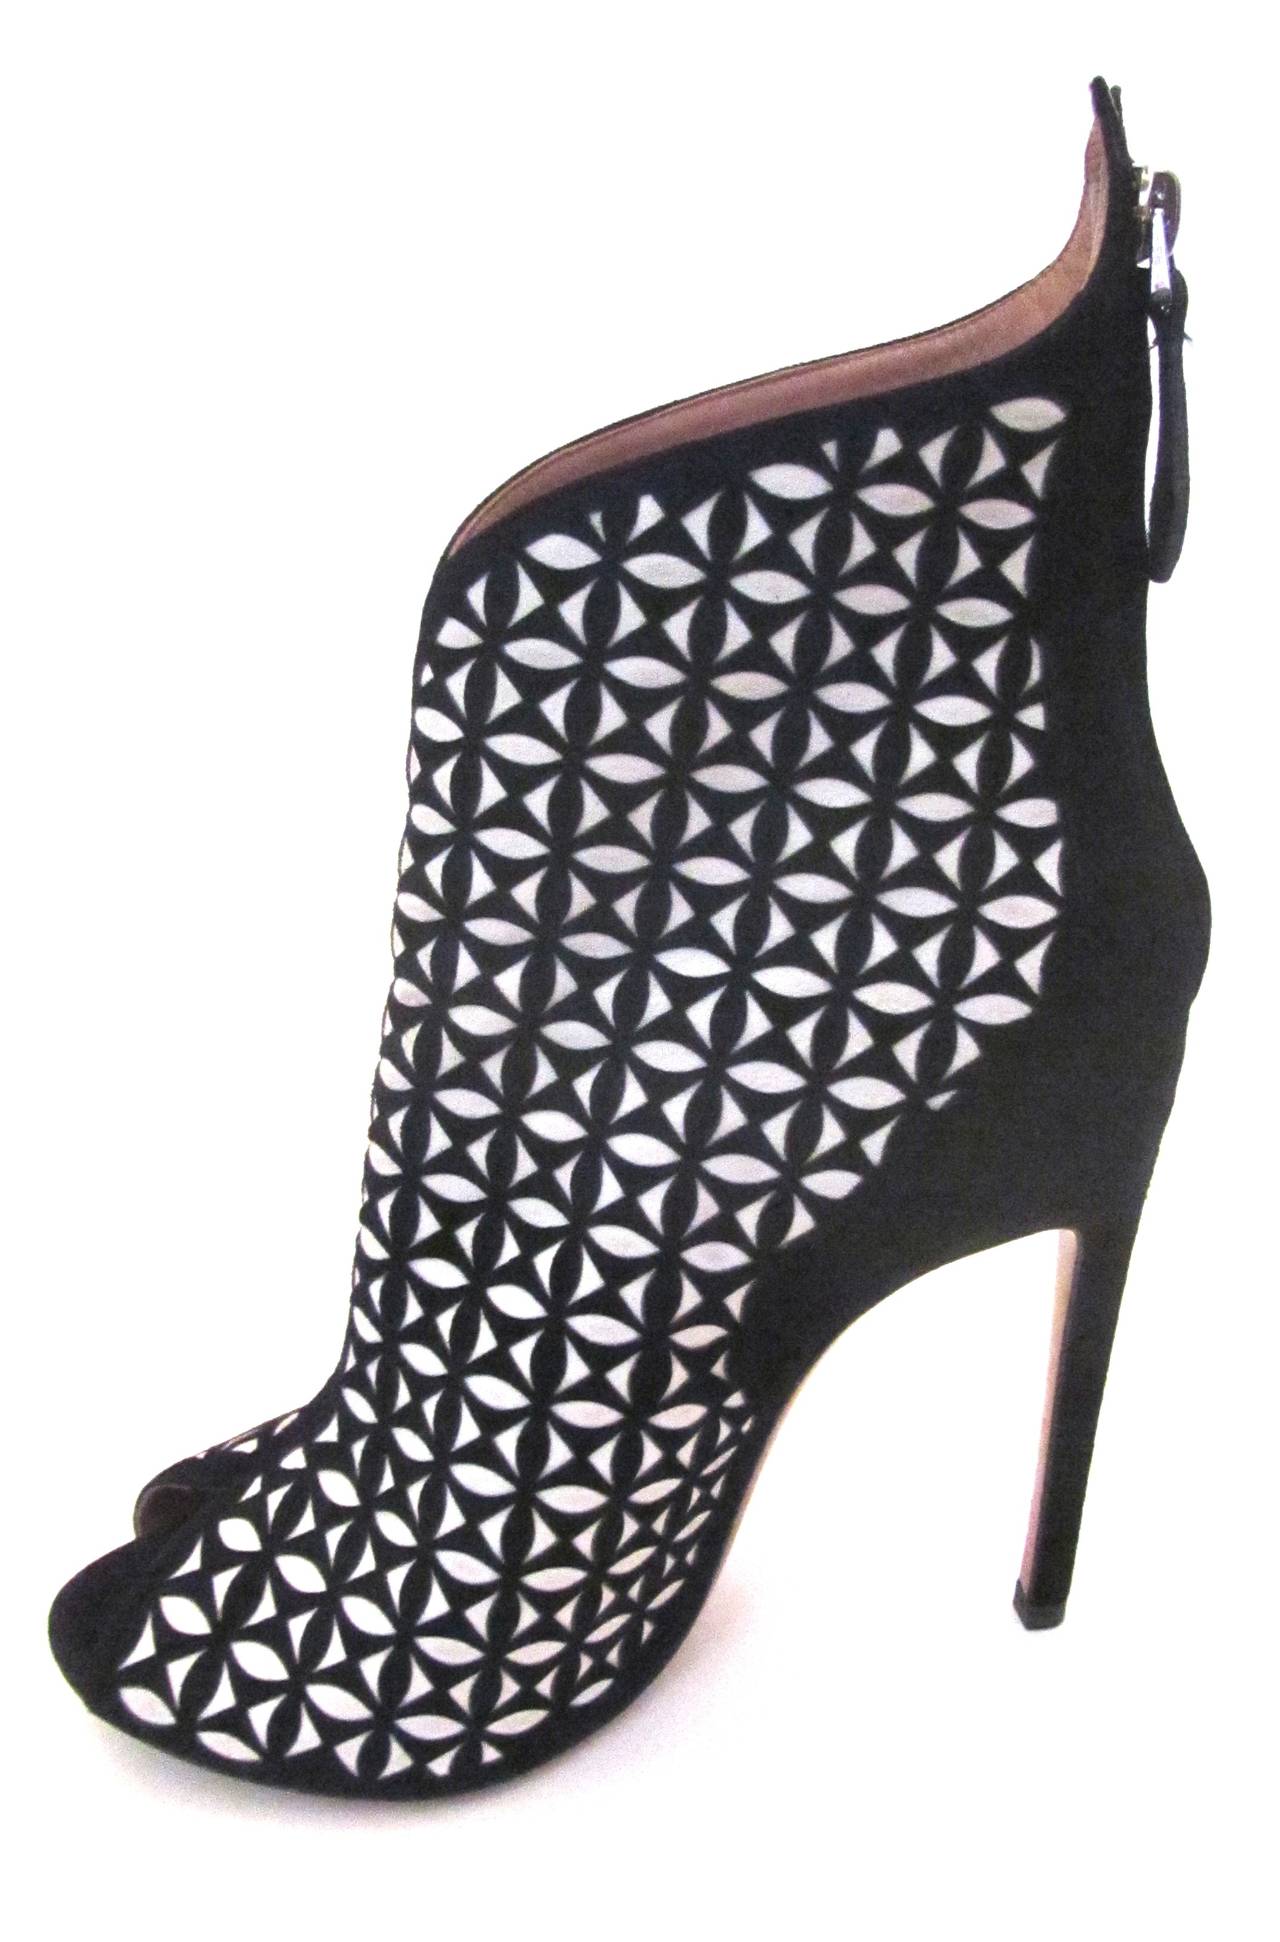 New Alaia high heel open toed boots. Boots are flawless suede of black and white shapes. The boots zip up in the back. The size of the heel is 4.5 inches. The pair of boots are a masterpiece of fashion design and make a tremendous statement with any